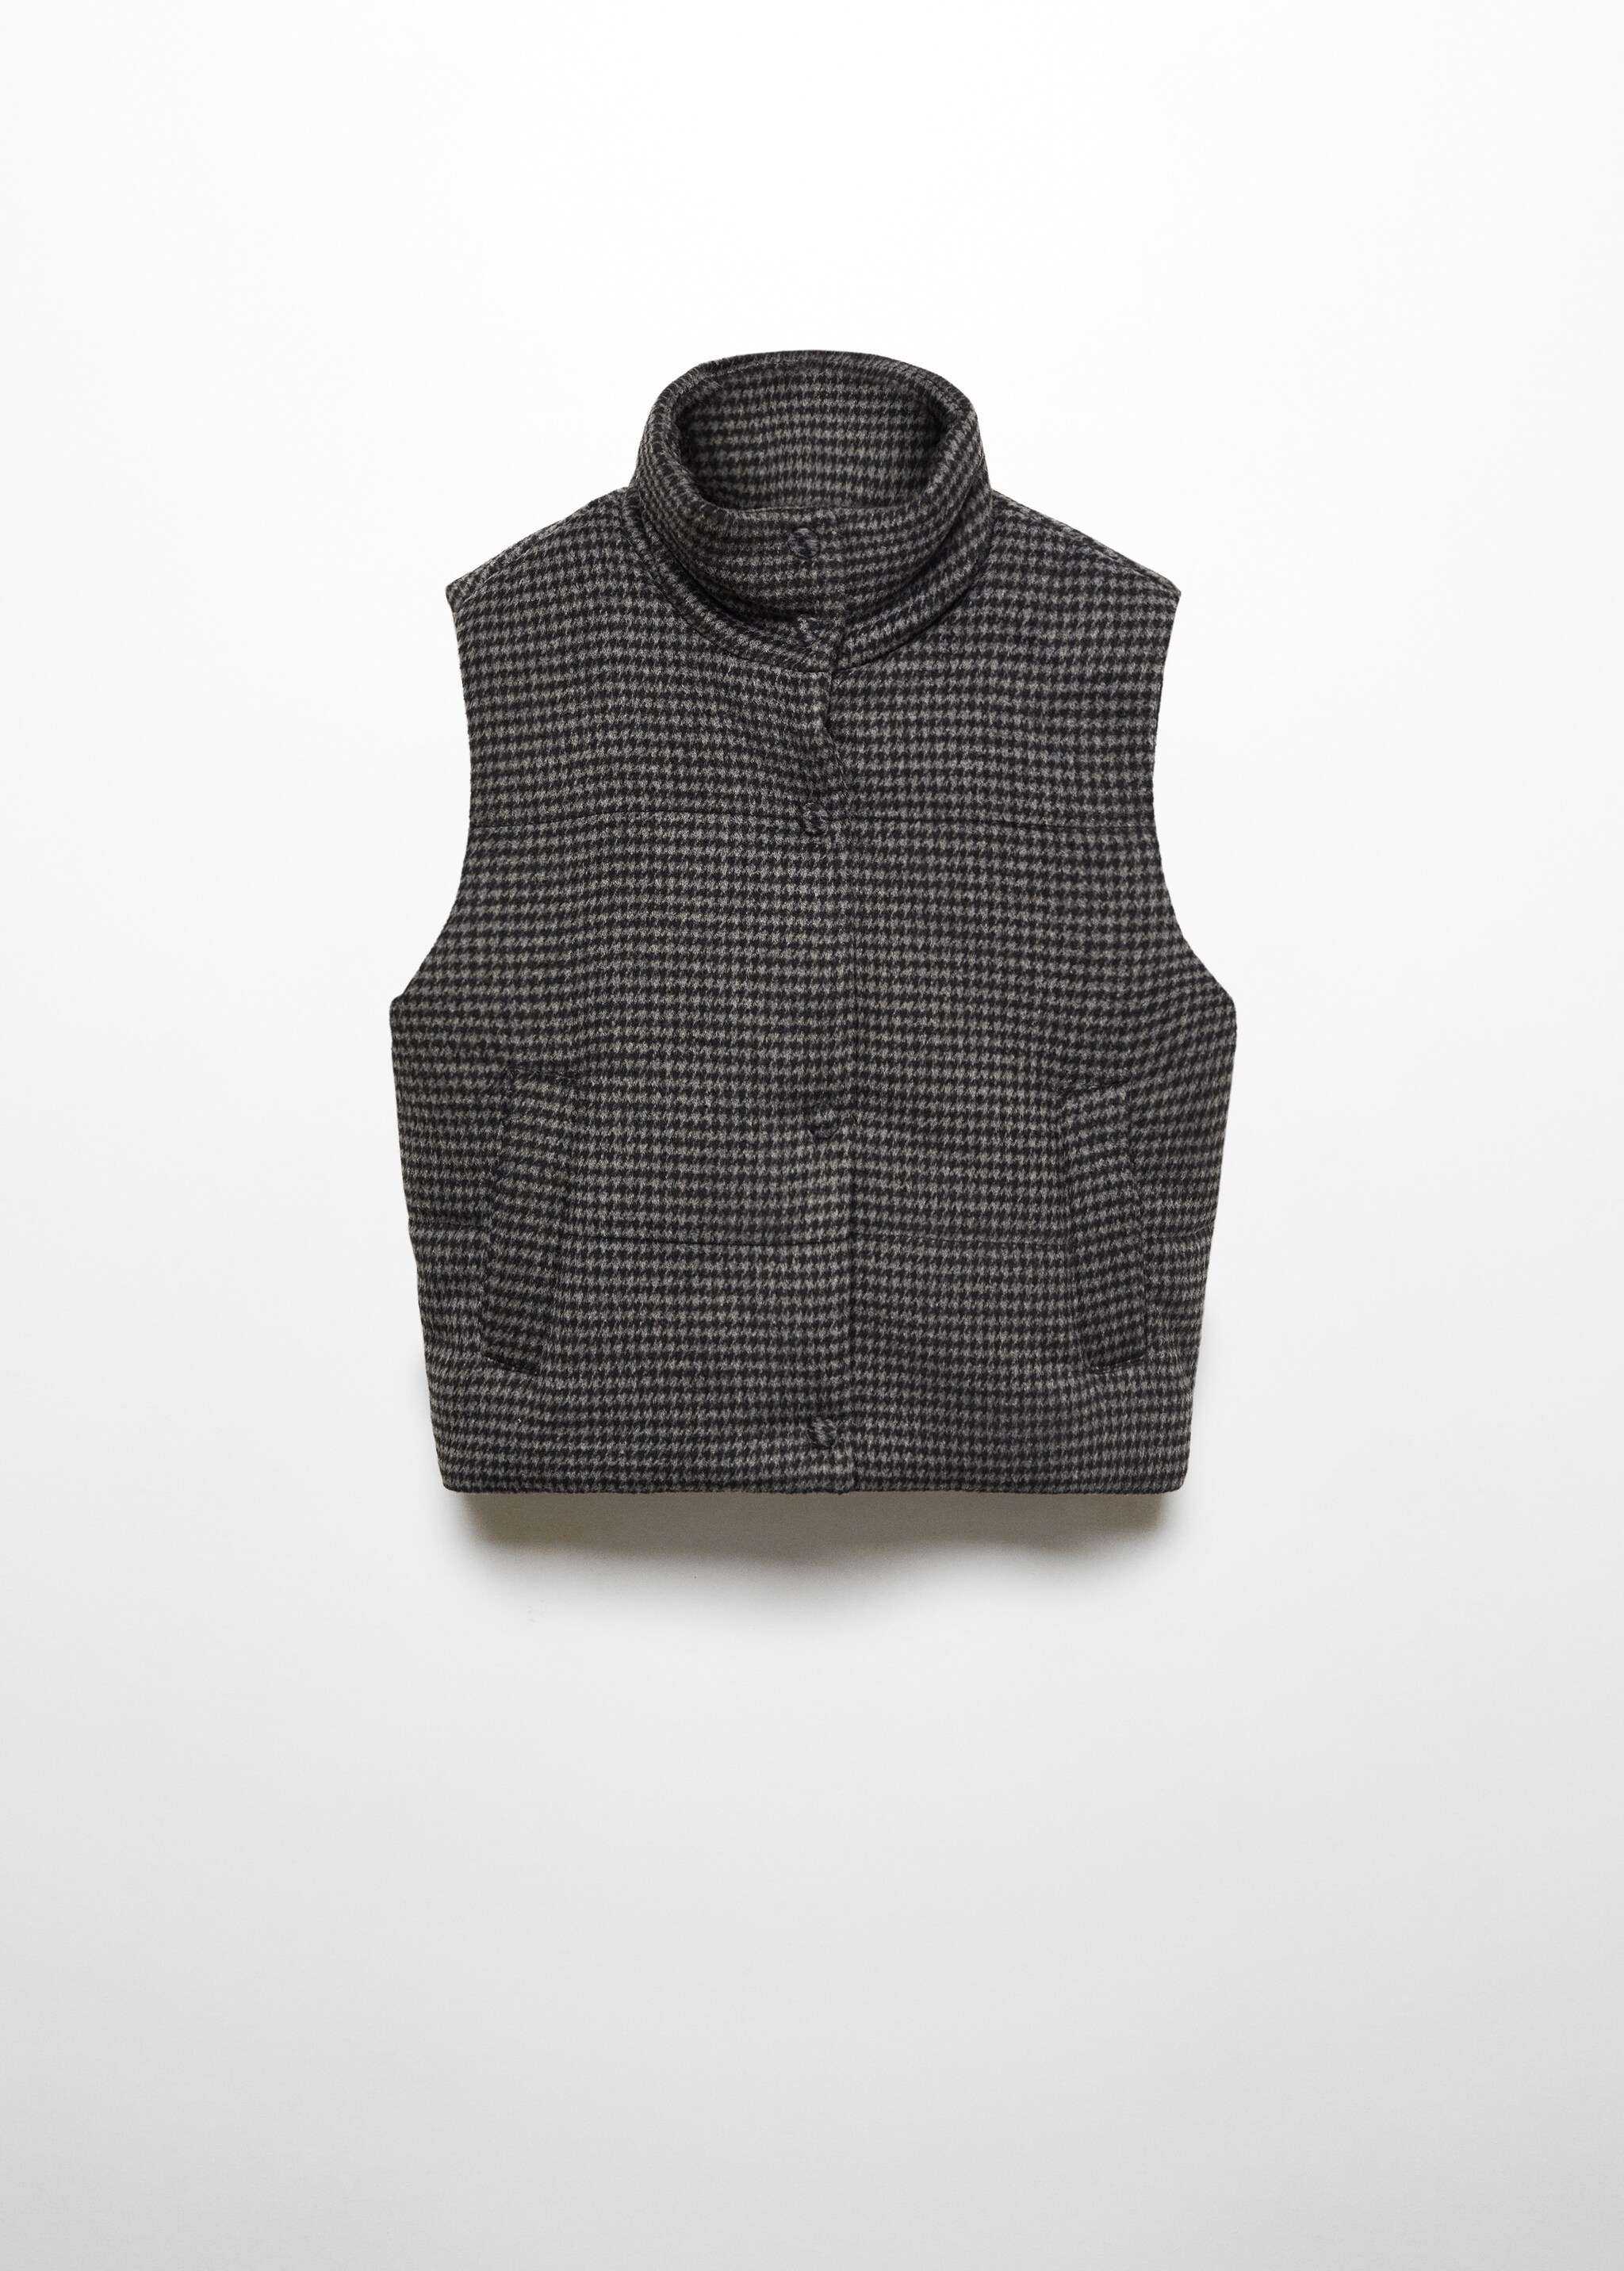 Houndstooth gilet - Article without model